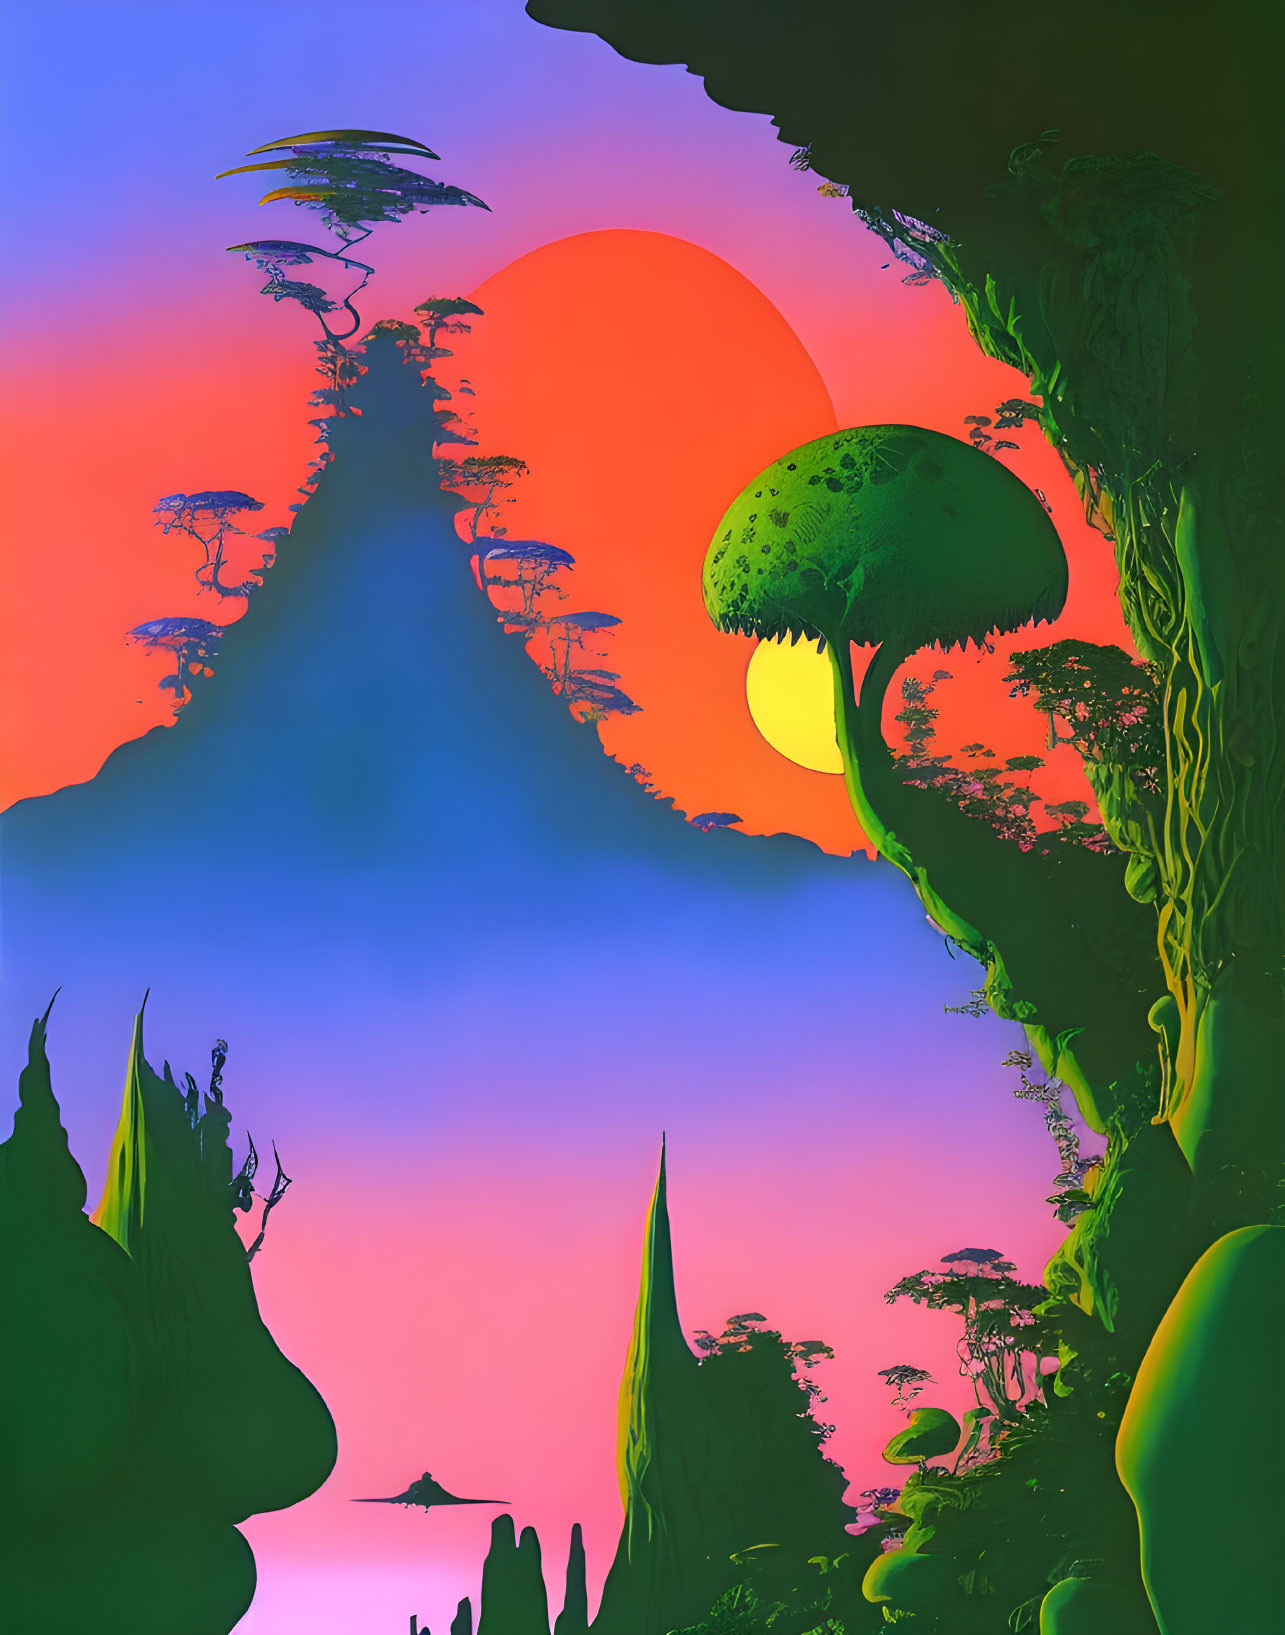 Colorful Psychedelic Landscape with Red Sun and Towering Mushrooms